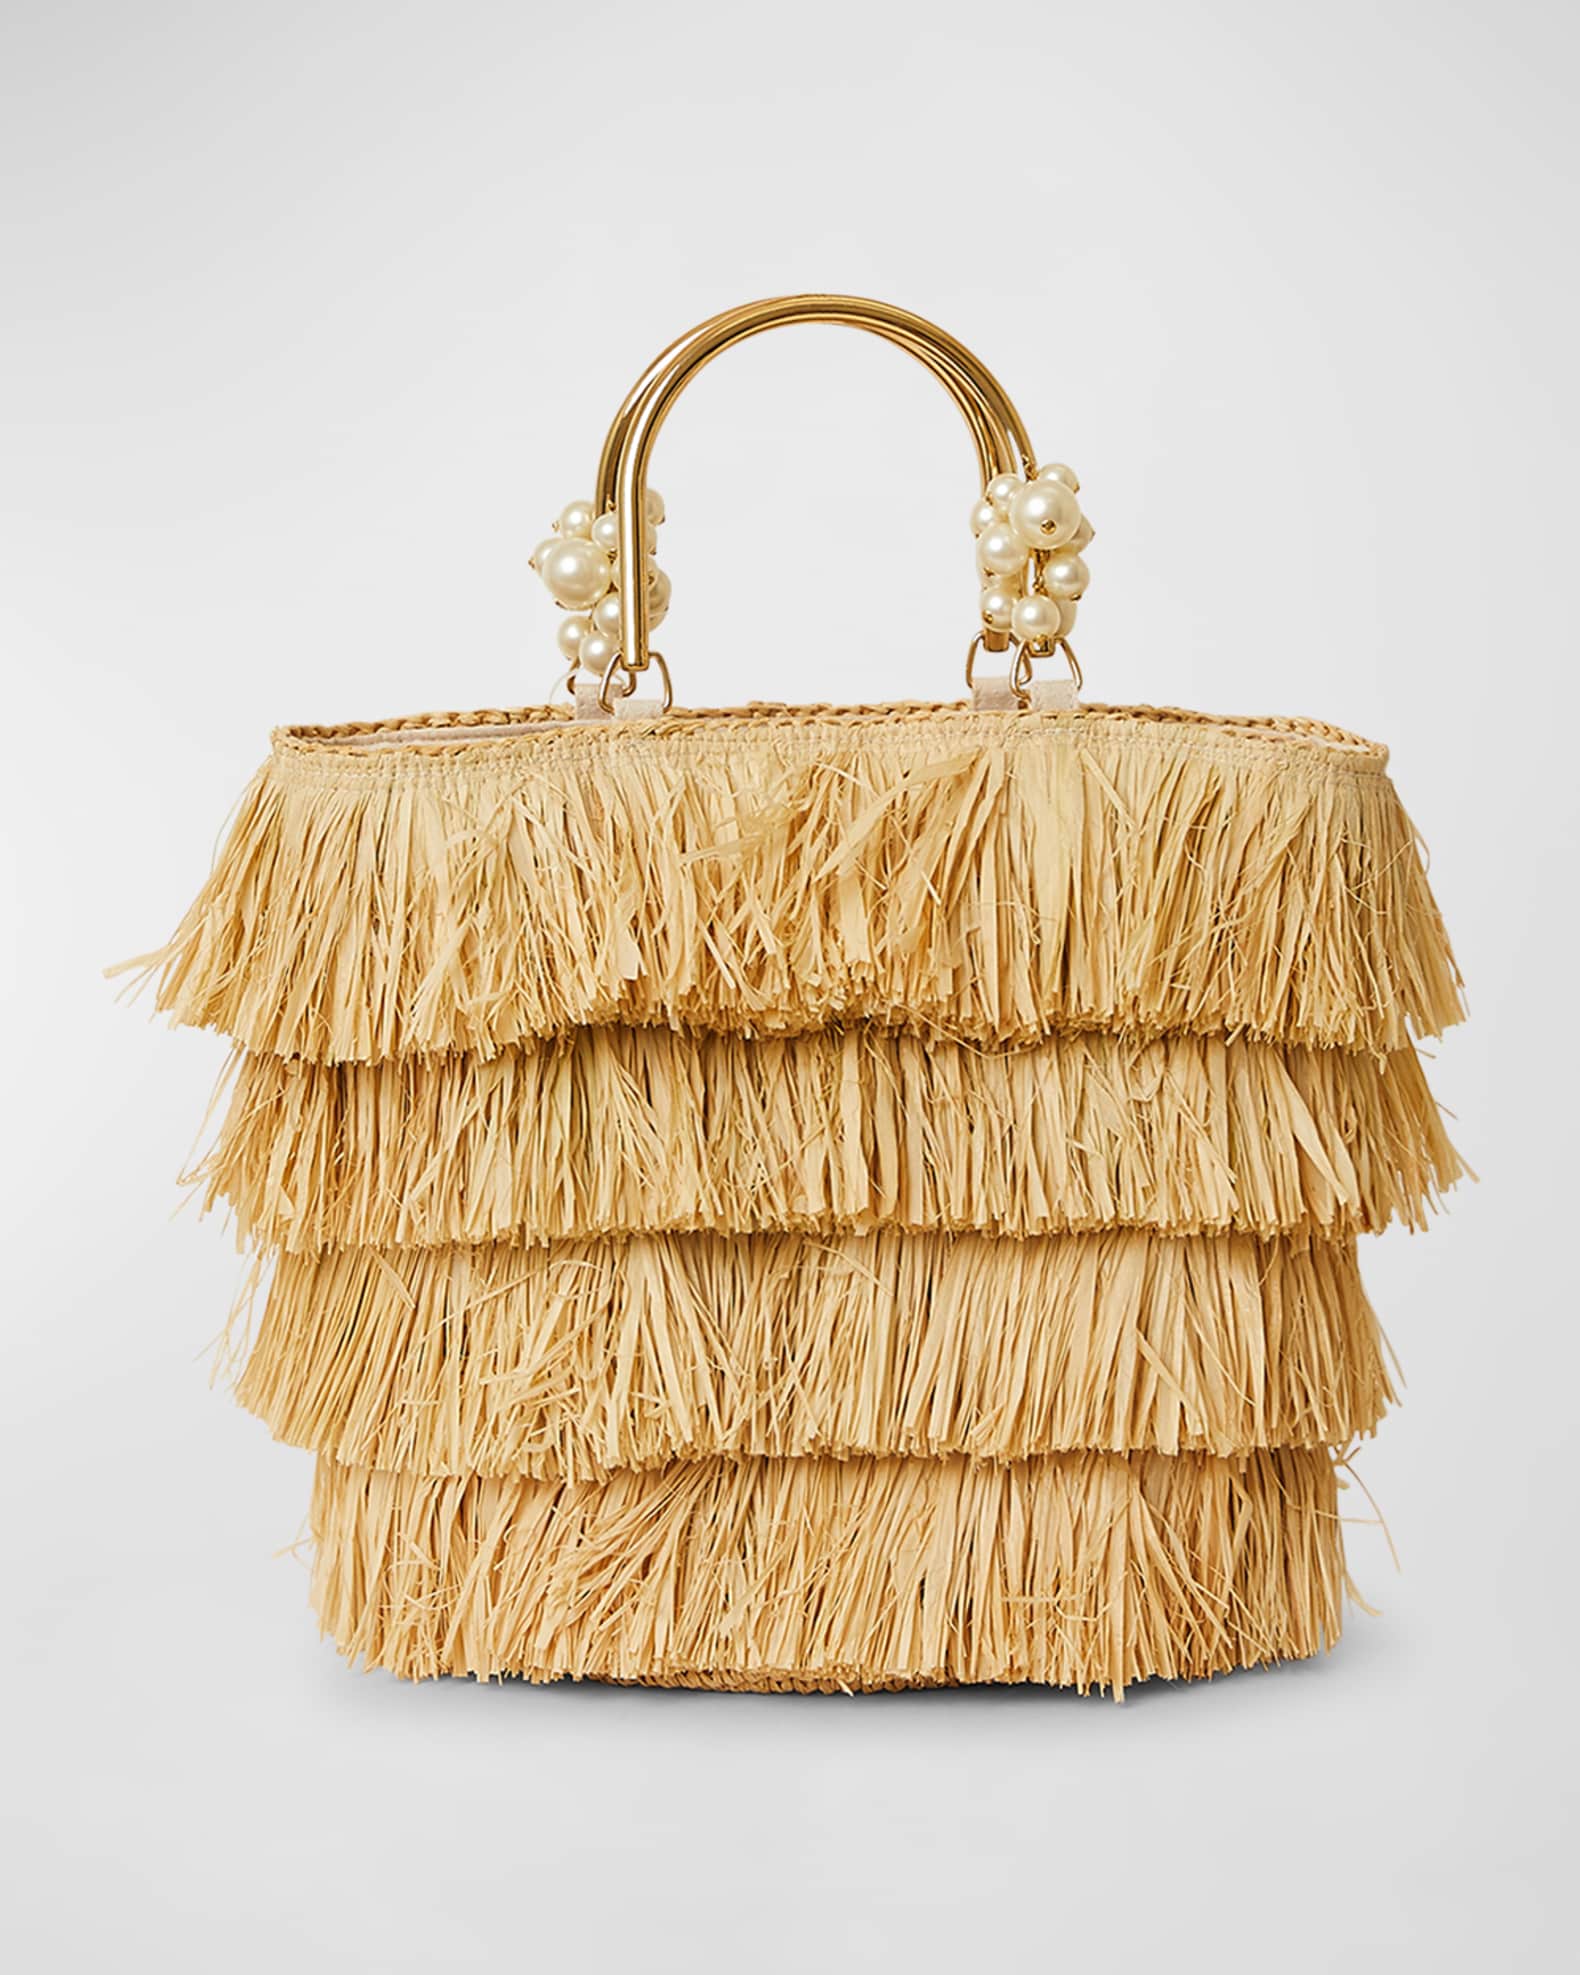 Gucci, Embellished Leather-trimmed Crocheted Raffia Tote, Neutrals, One  size